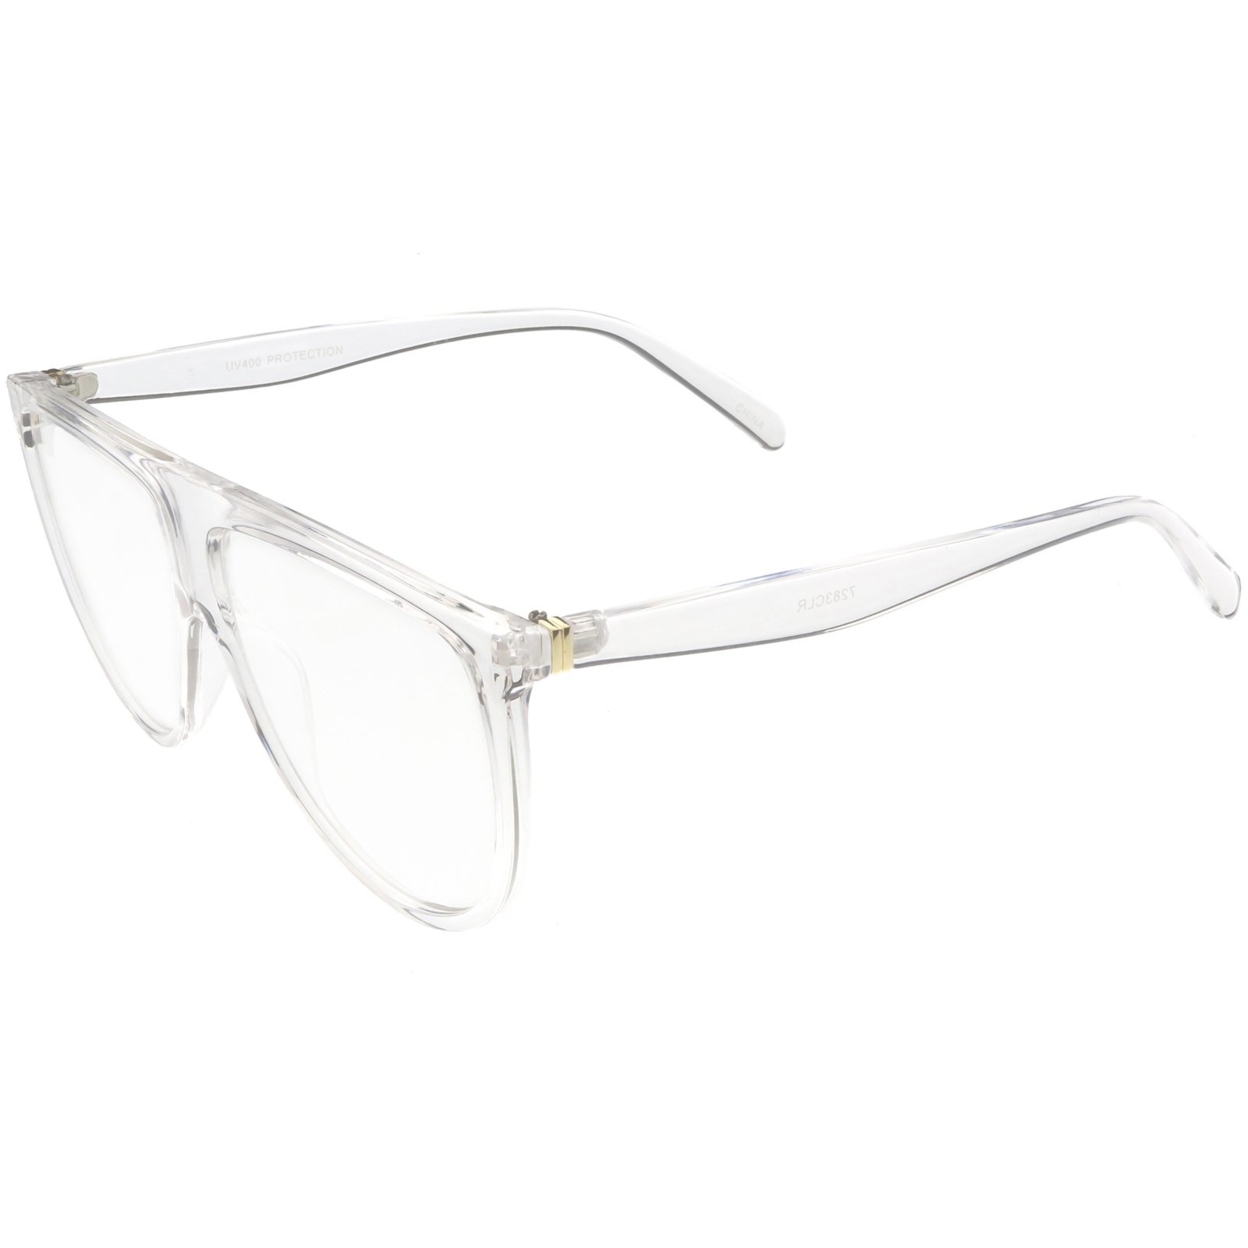 Oversize Bold Flat Top Aviator Eyeglasses With Clear Lens 60mm - Clear / Clear